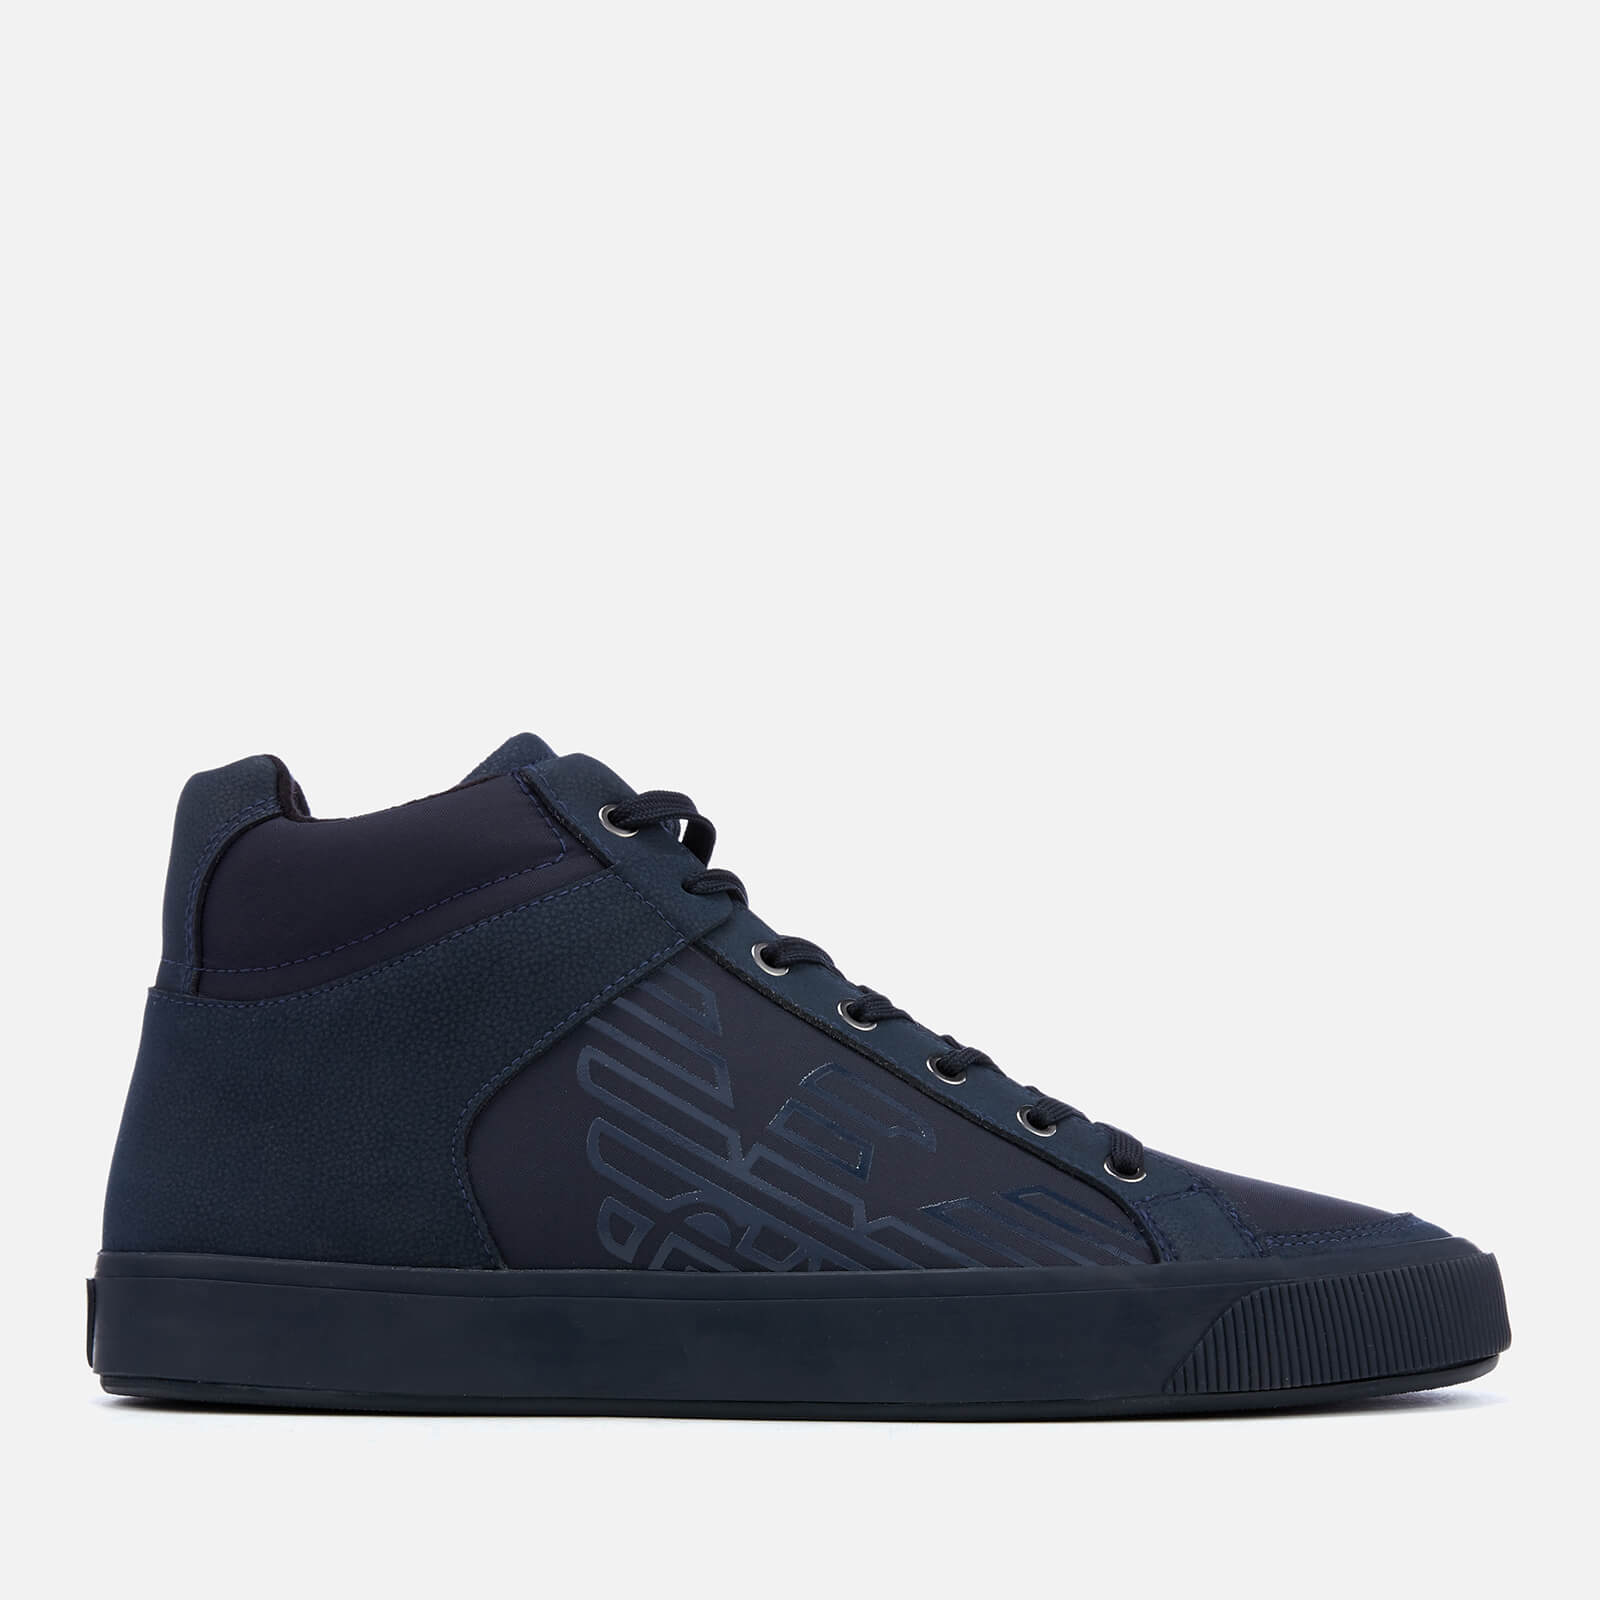 mens armani high top trainers